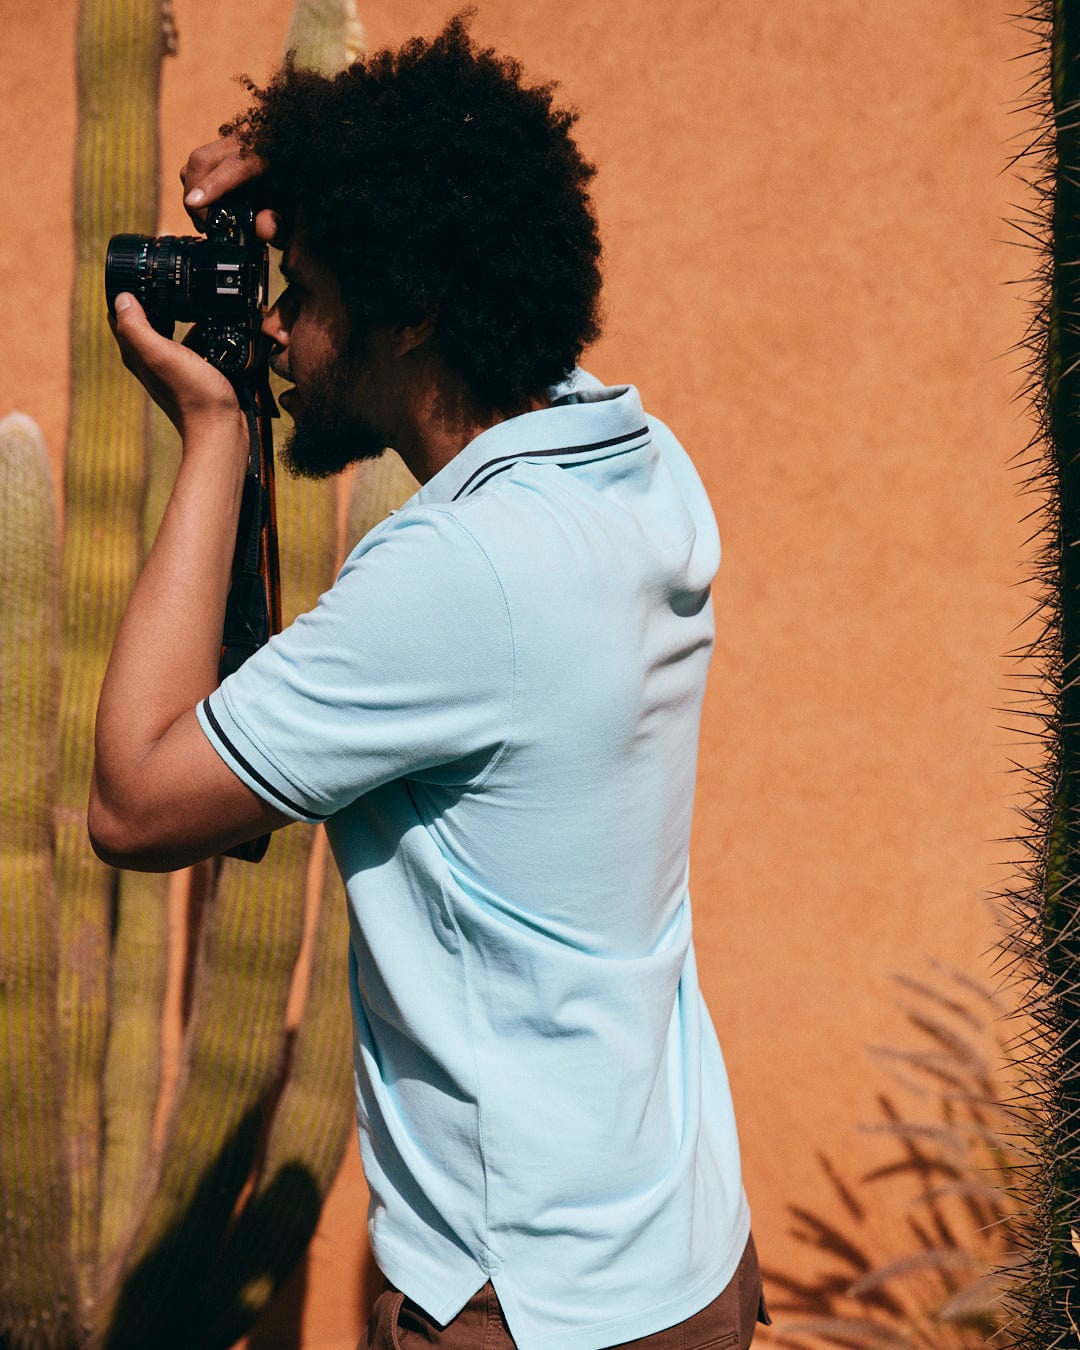 A person wearing the Strike Logo - Mens Short Sleeve Polo Shirt - Light Blue by Saltrock and brown pants is holding a camera up to their eye, capturing a photo next to a cactus.